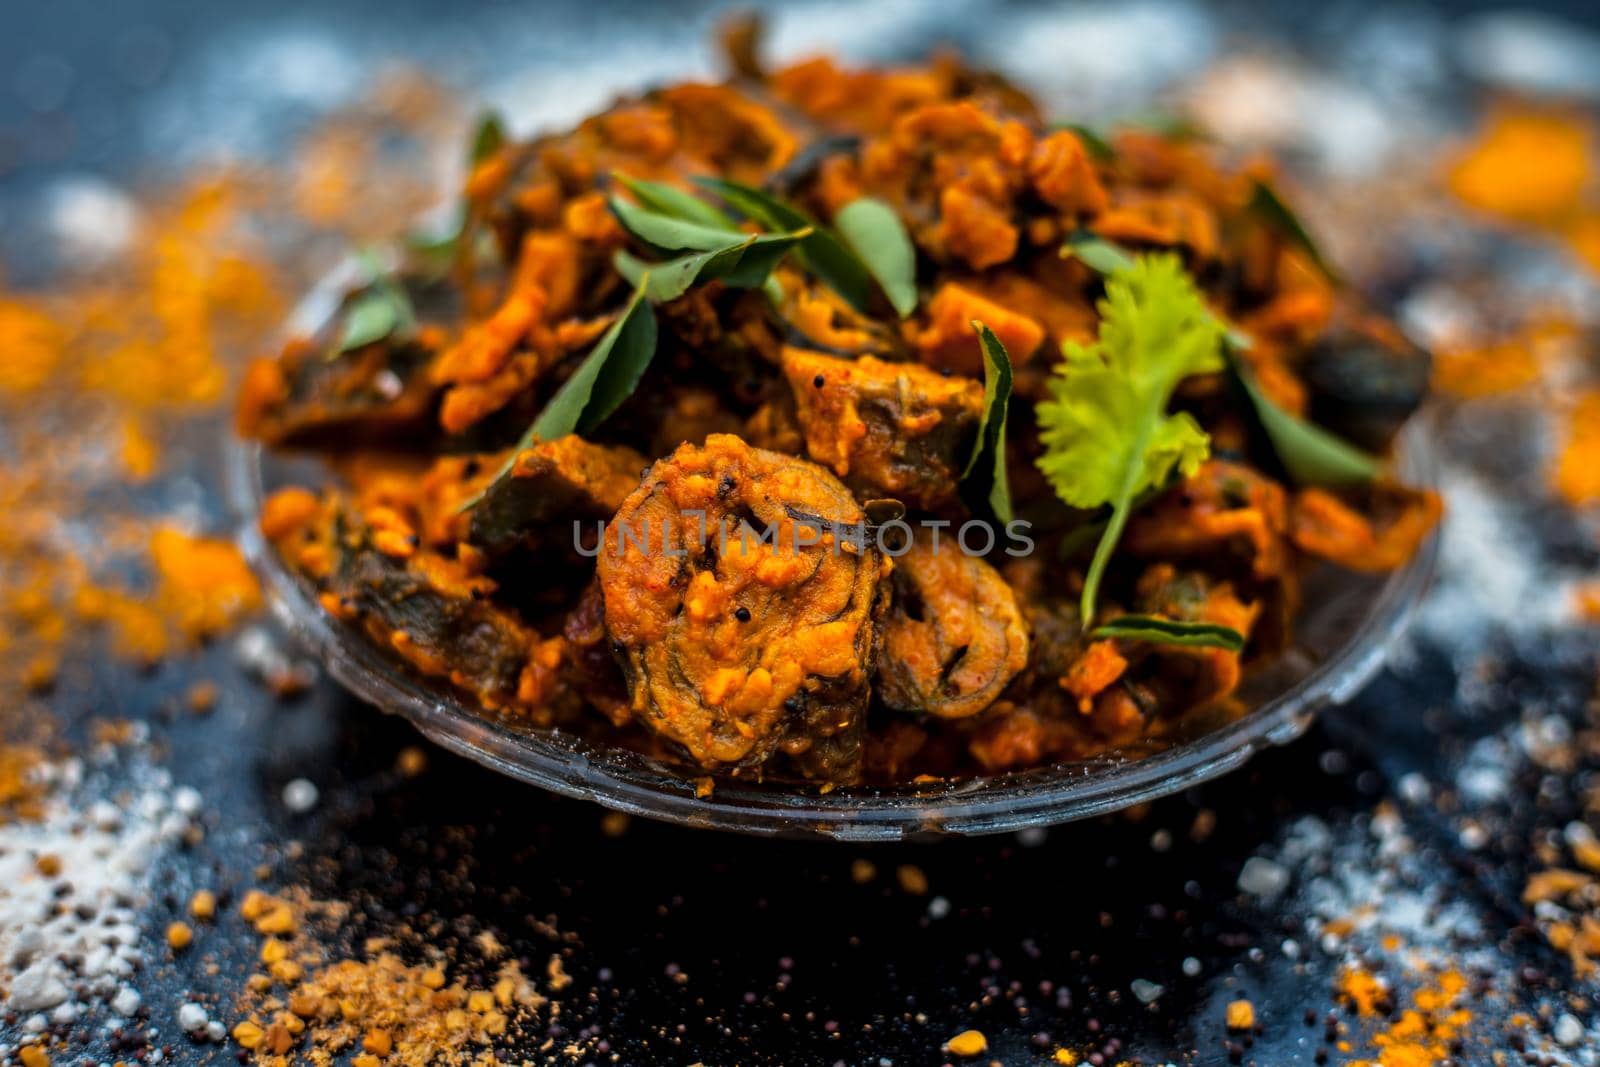 Famous Indian & Gujarati snack dish in a glass plate on wooden surface i.e. Patra or paatra consisting of mainly Colocasia esculenta or arbi ke pan or elephant ear leaves and spices. Horizontal shot. by mirzamlk